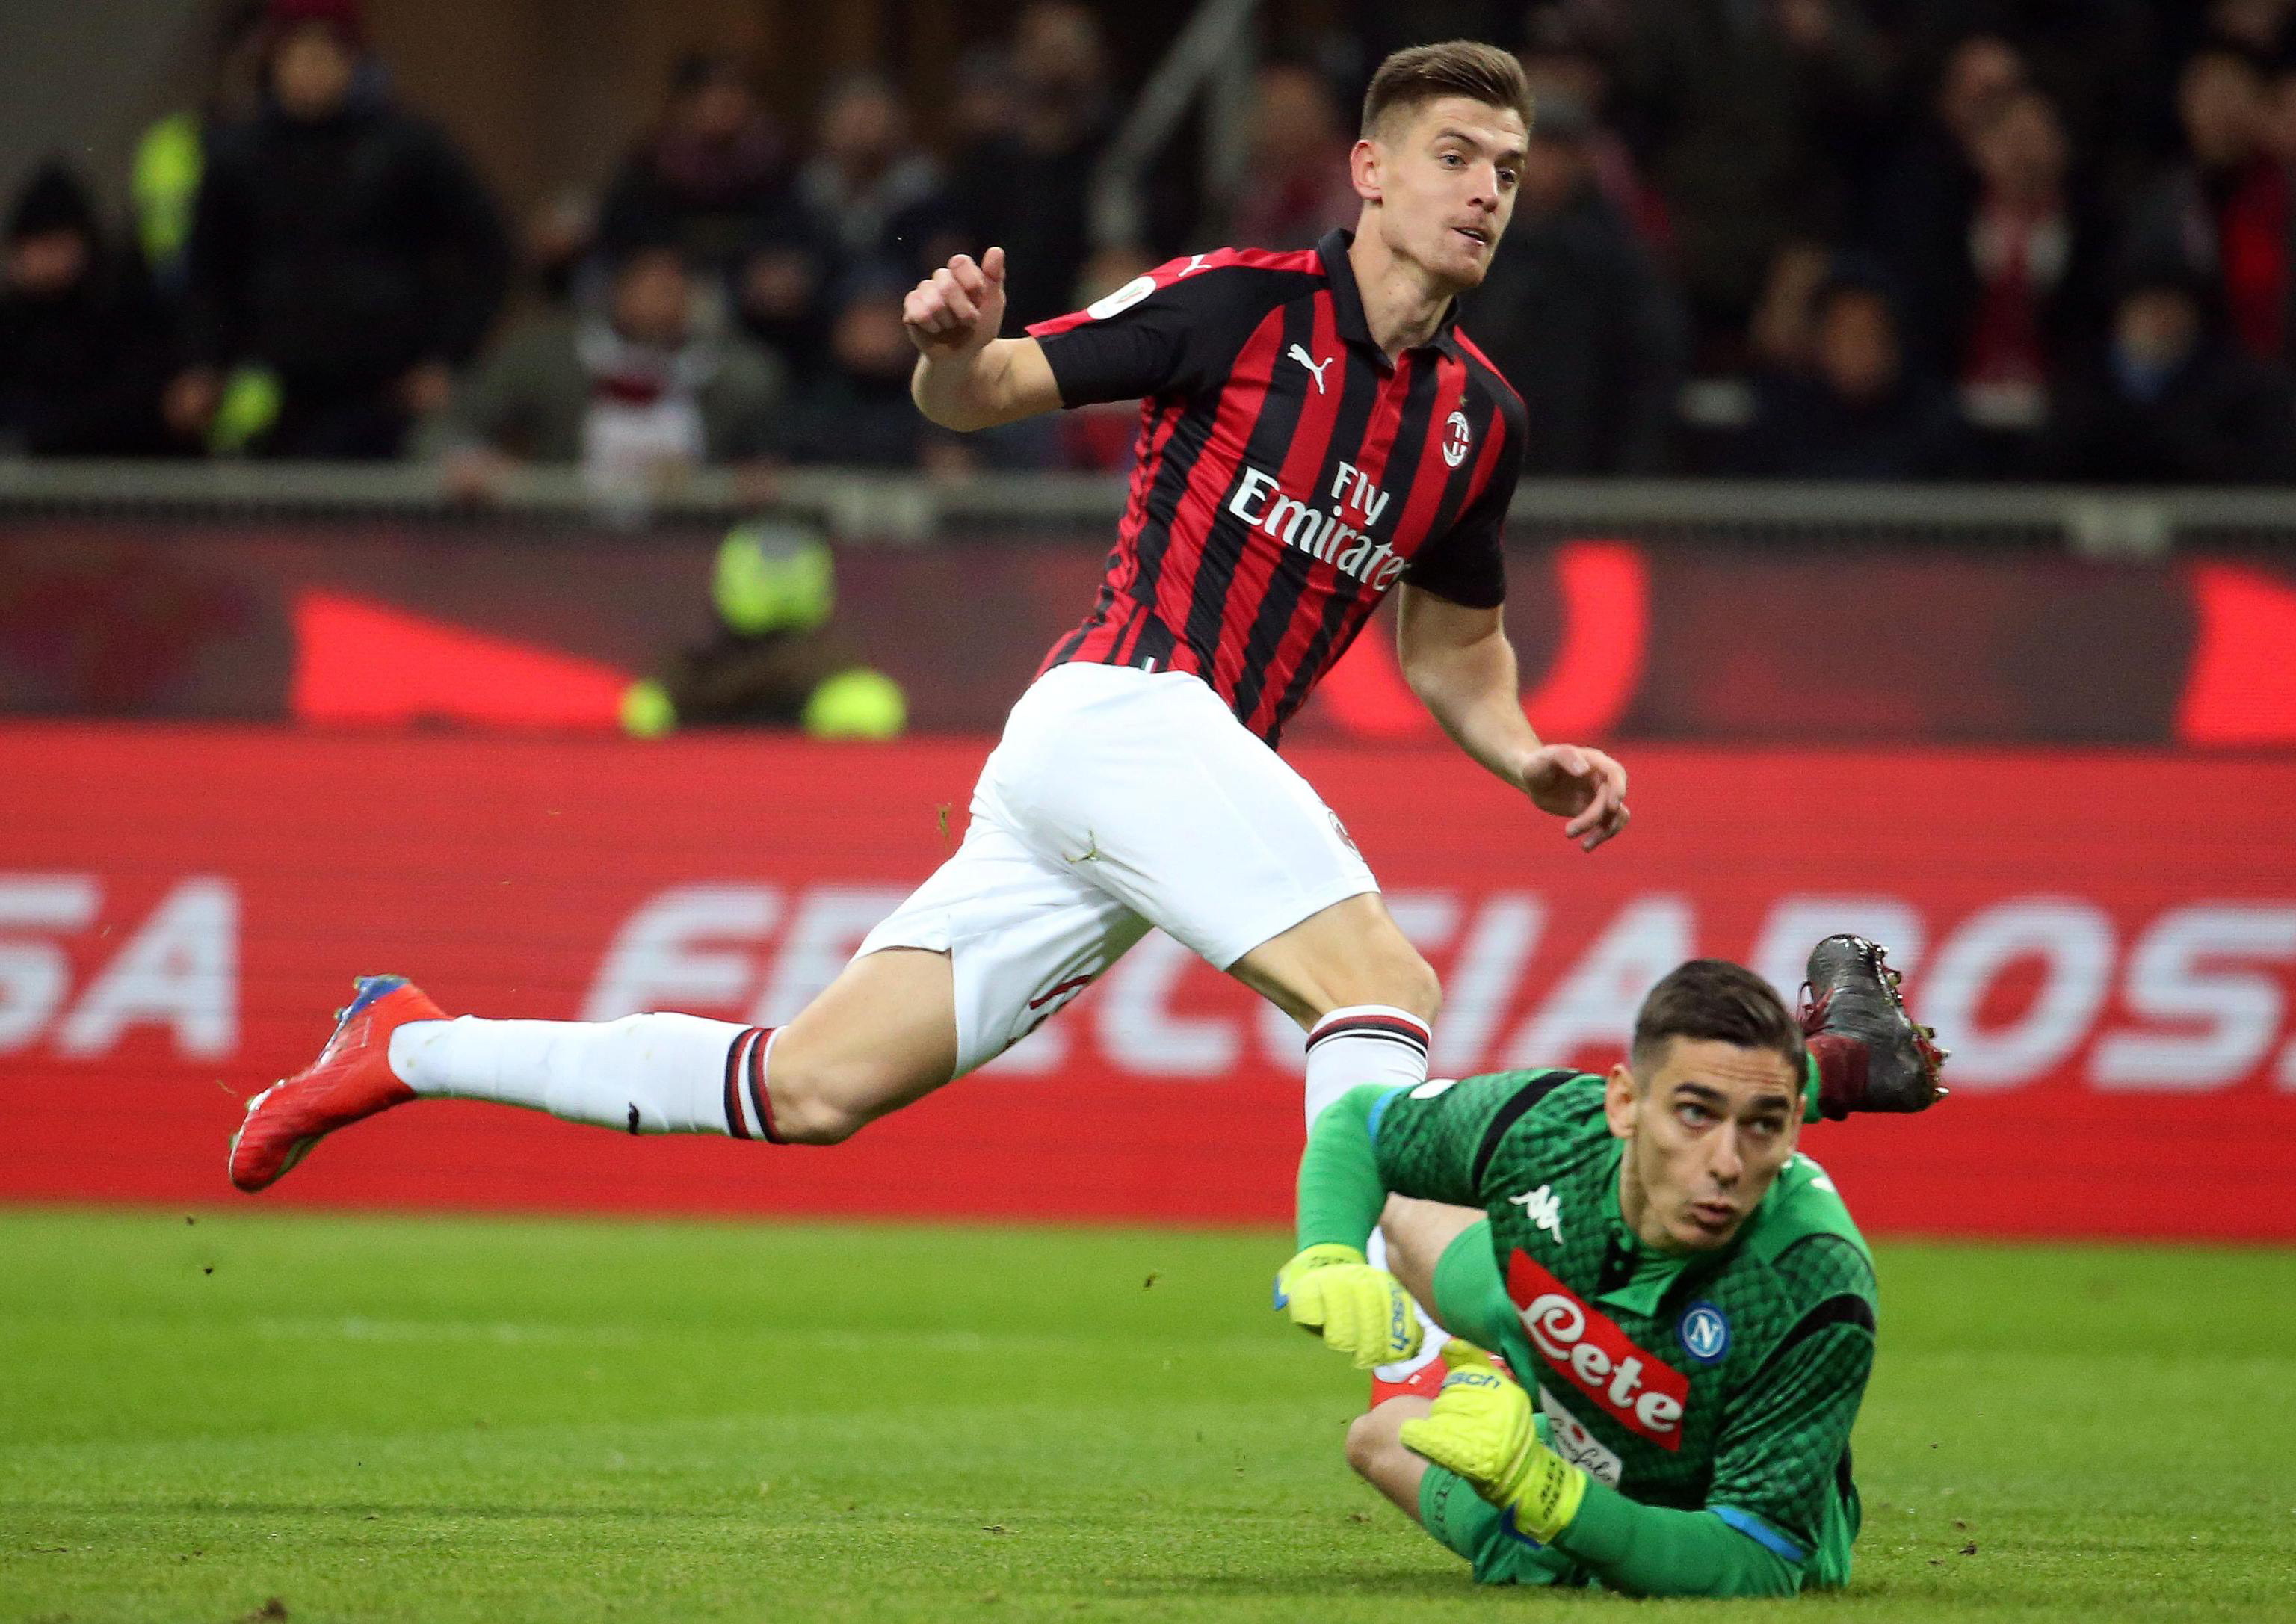 epa07330420 Milan's Krzysztof Piatek (L) scores during the Italy Cup quarter-finals soccer match between AC Milan and SSC Napoli at the Giuseppe Meazza stadium in Milan, Italy, 29 January 2019.  EPA/MATTEO BAZZI